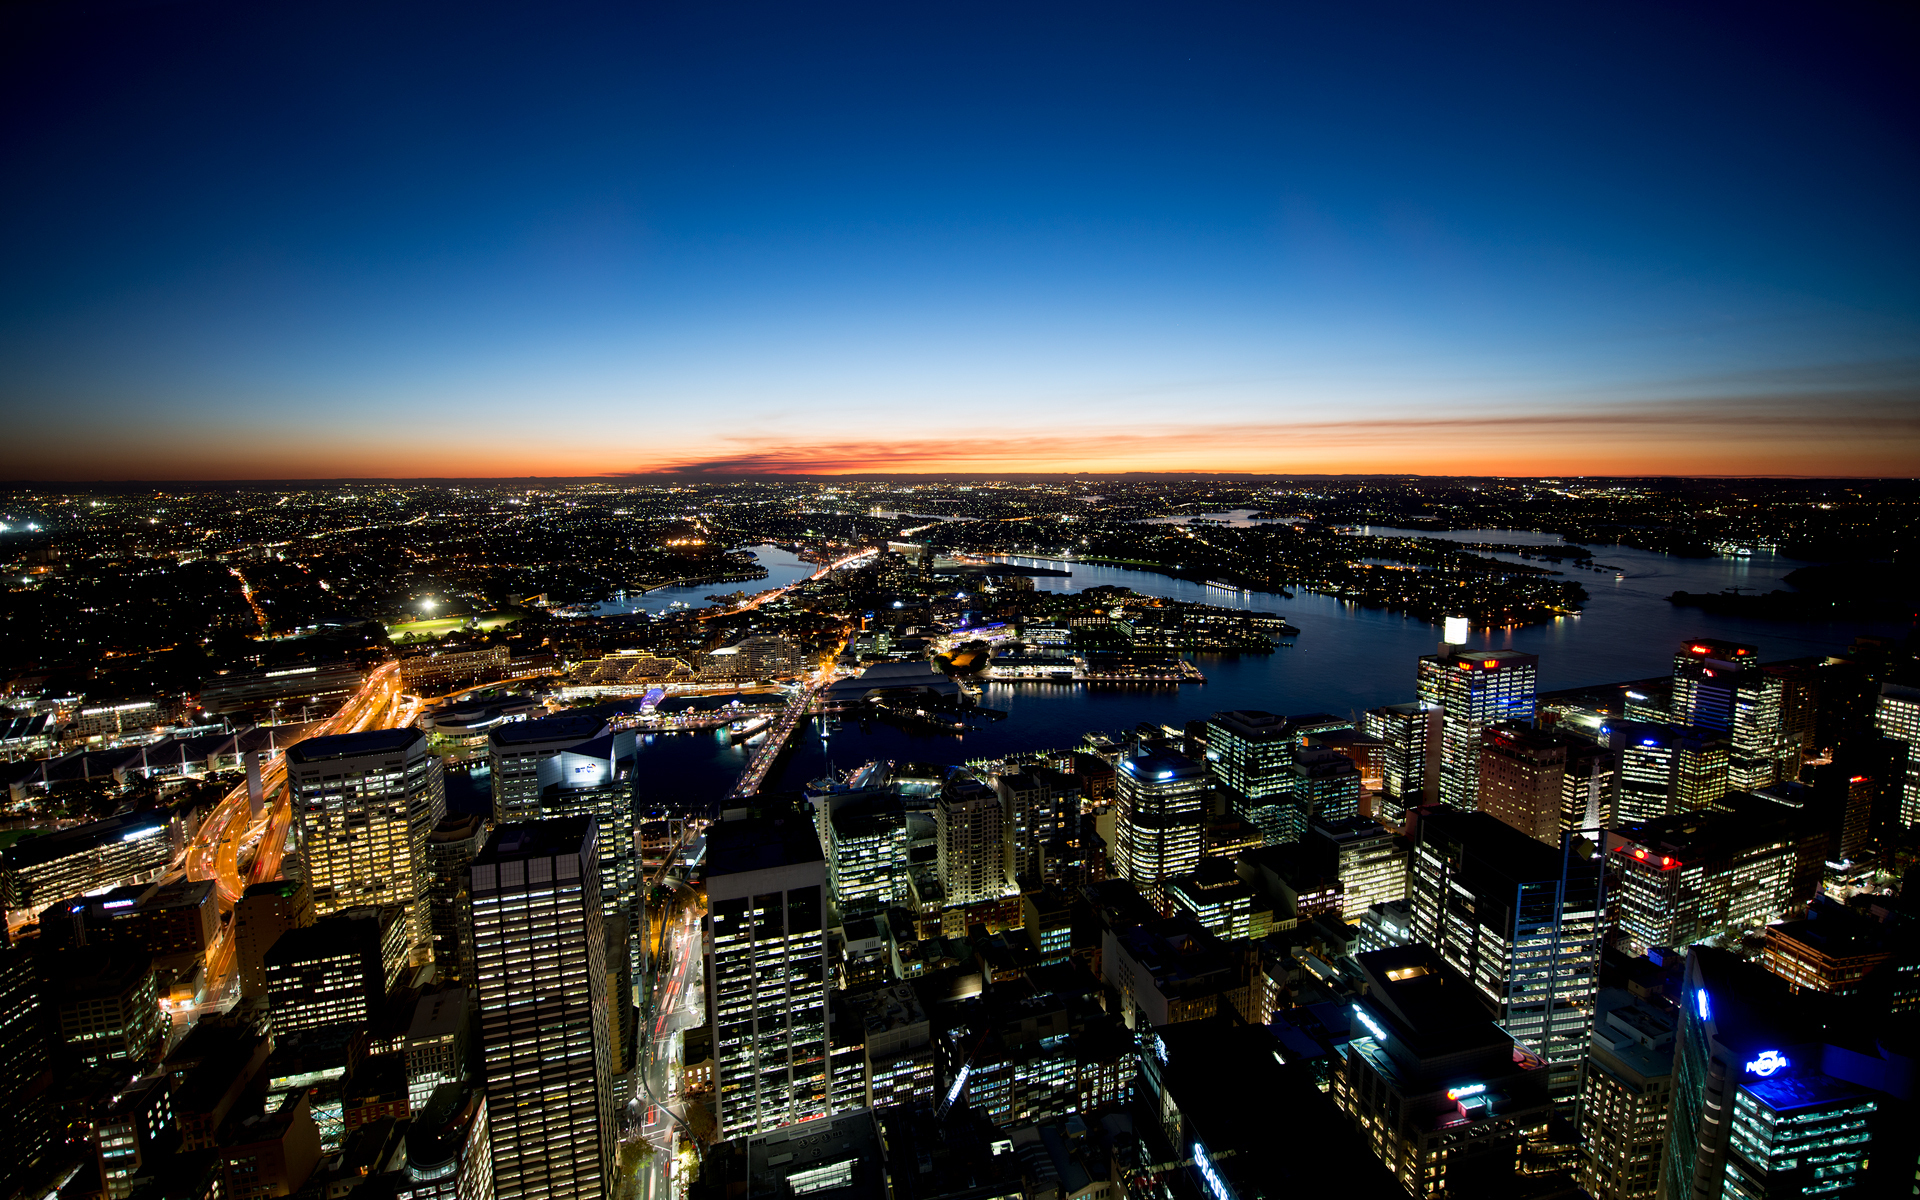 australia, Sydney, Skyline, Cityscape, Cities, Architecture, Buildings, Skyscrapers, Night, Lights, Hdr, Rivers, Sky, Sunset, Sunrise, Color, Scenic, View Wallpaper